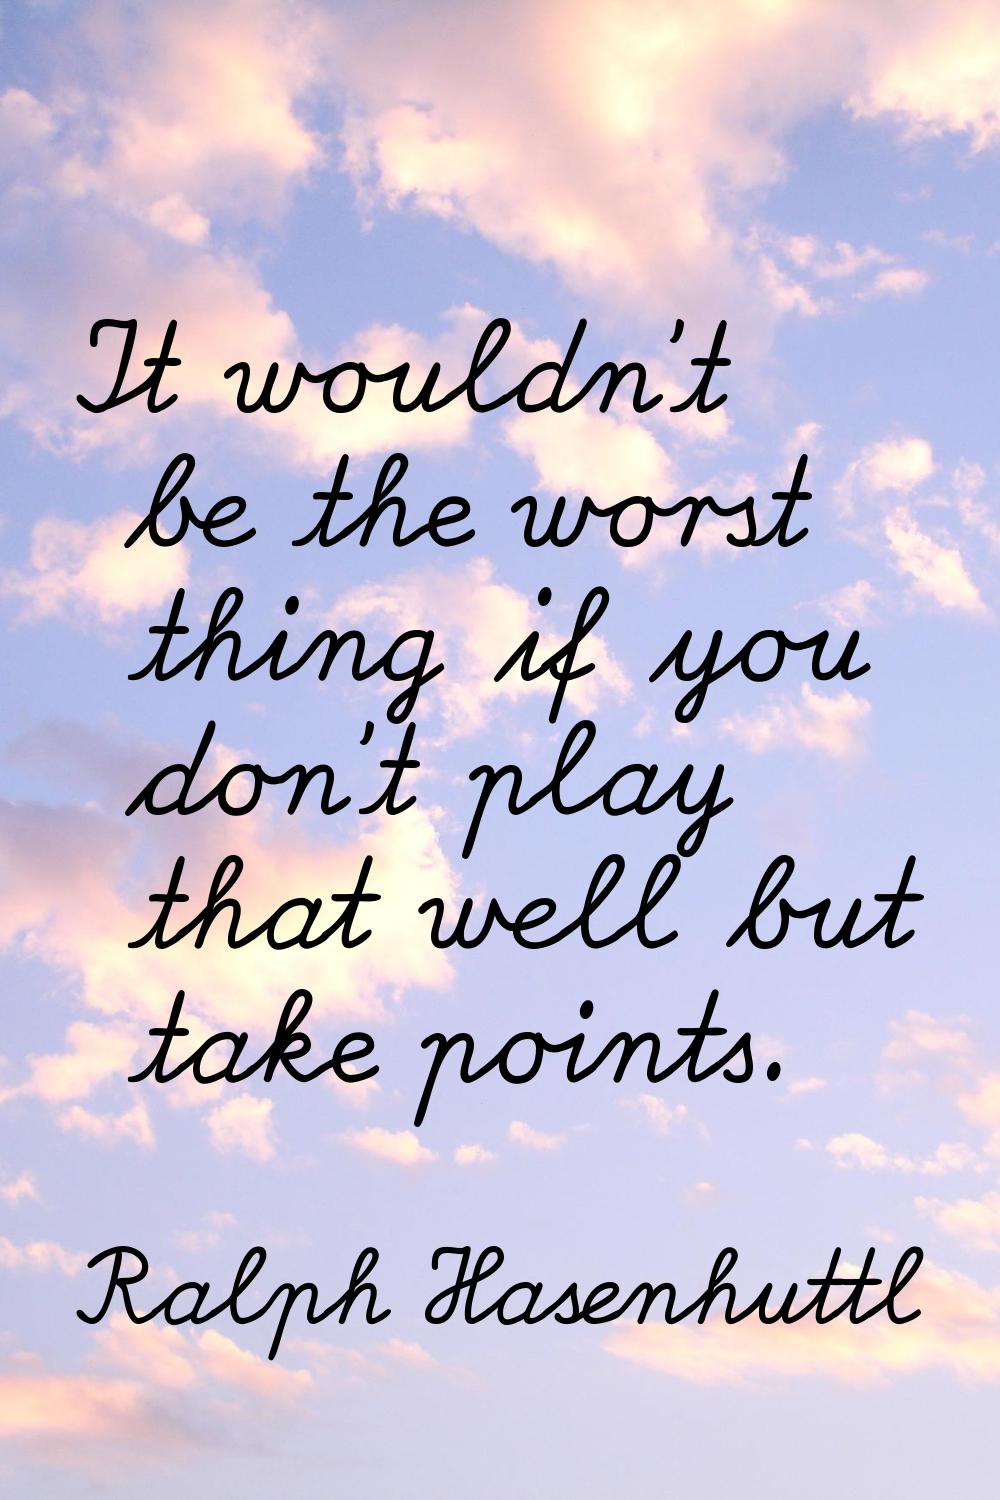 It wouldn't be the worst thing if you don't play that well but take points.